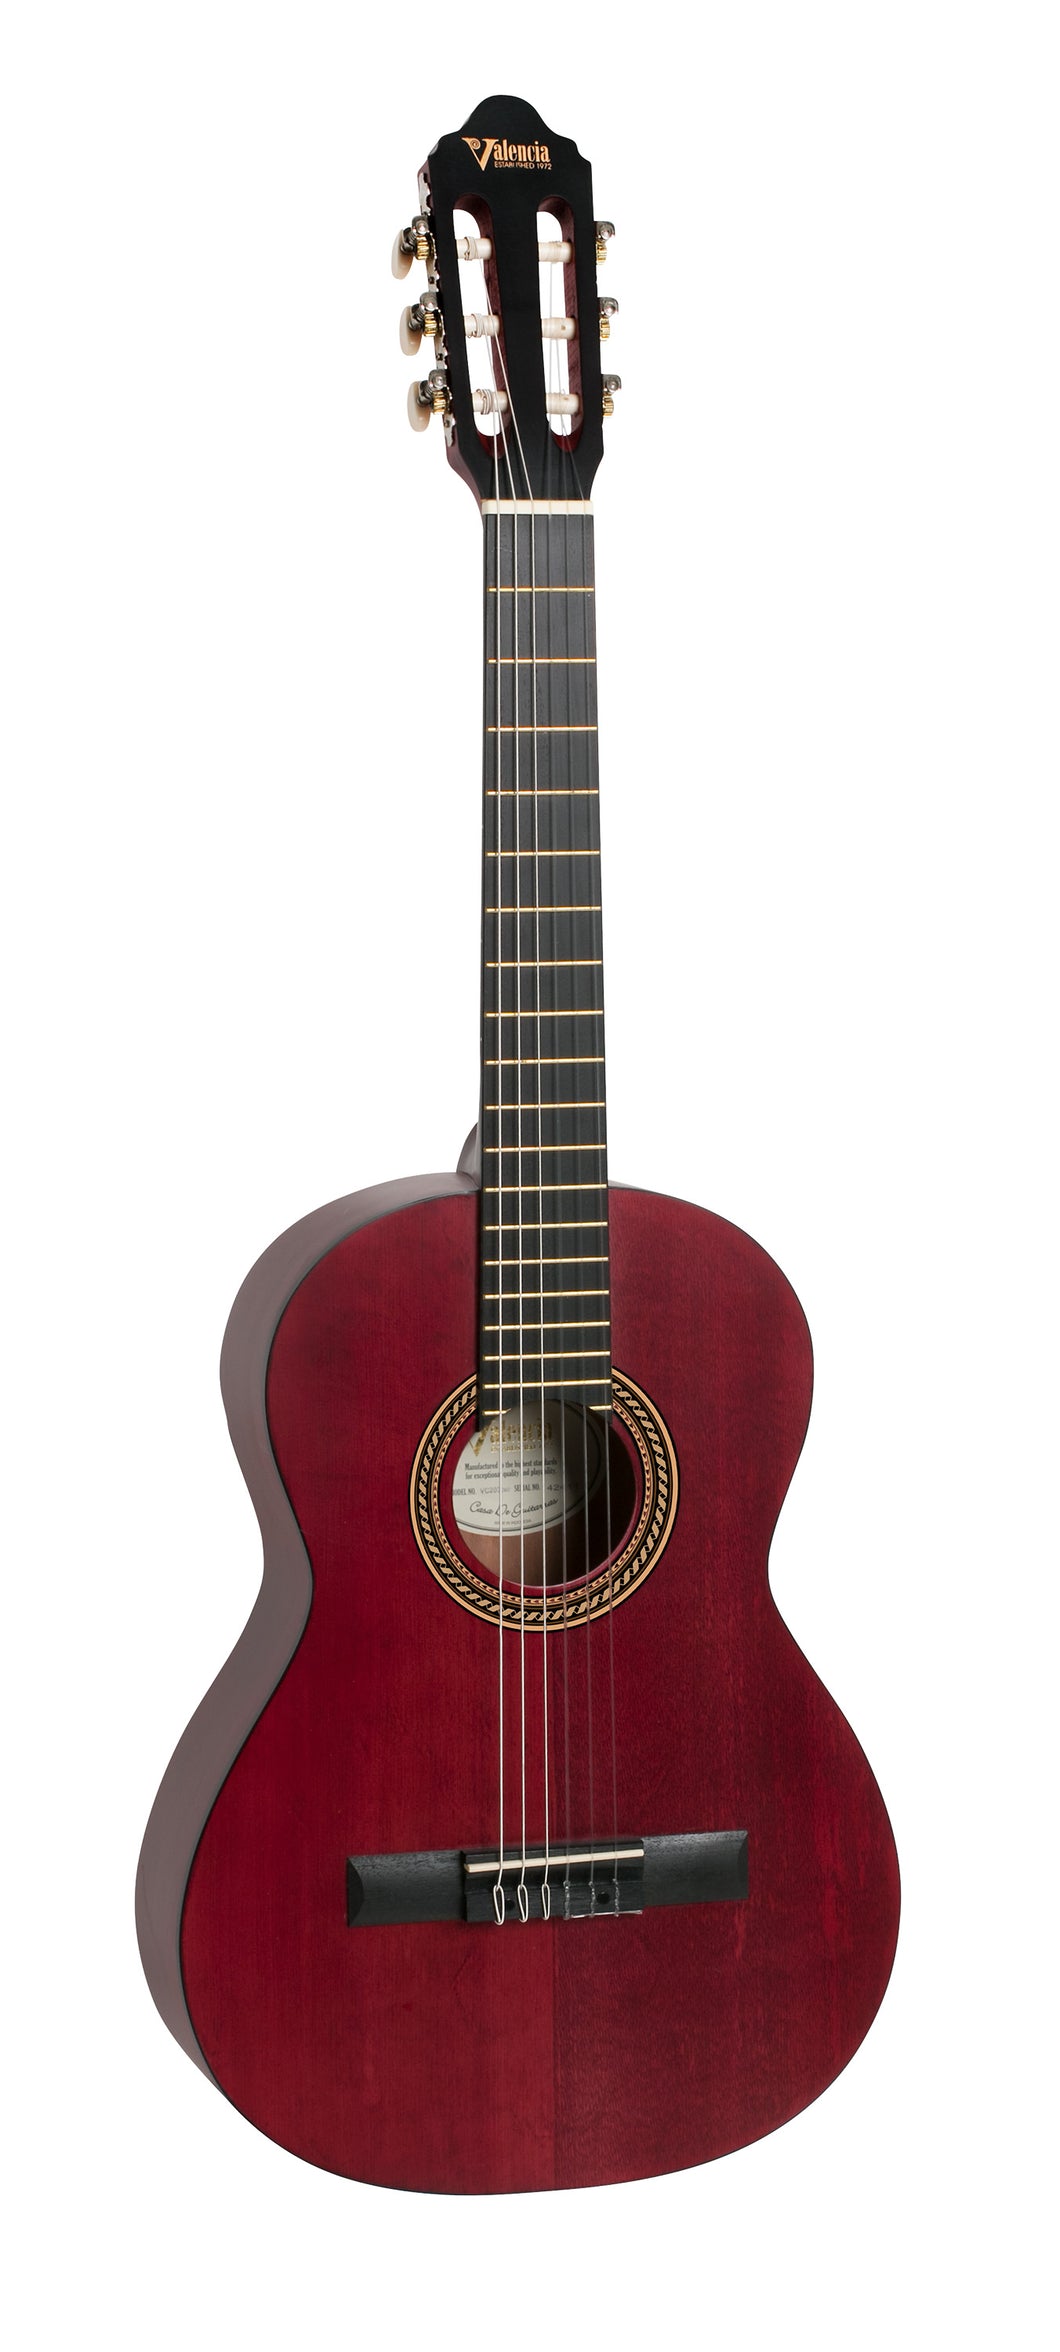 Valencia VC203 200 Series 3/4 Size Classical Guitar. Transparent Wine Red